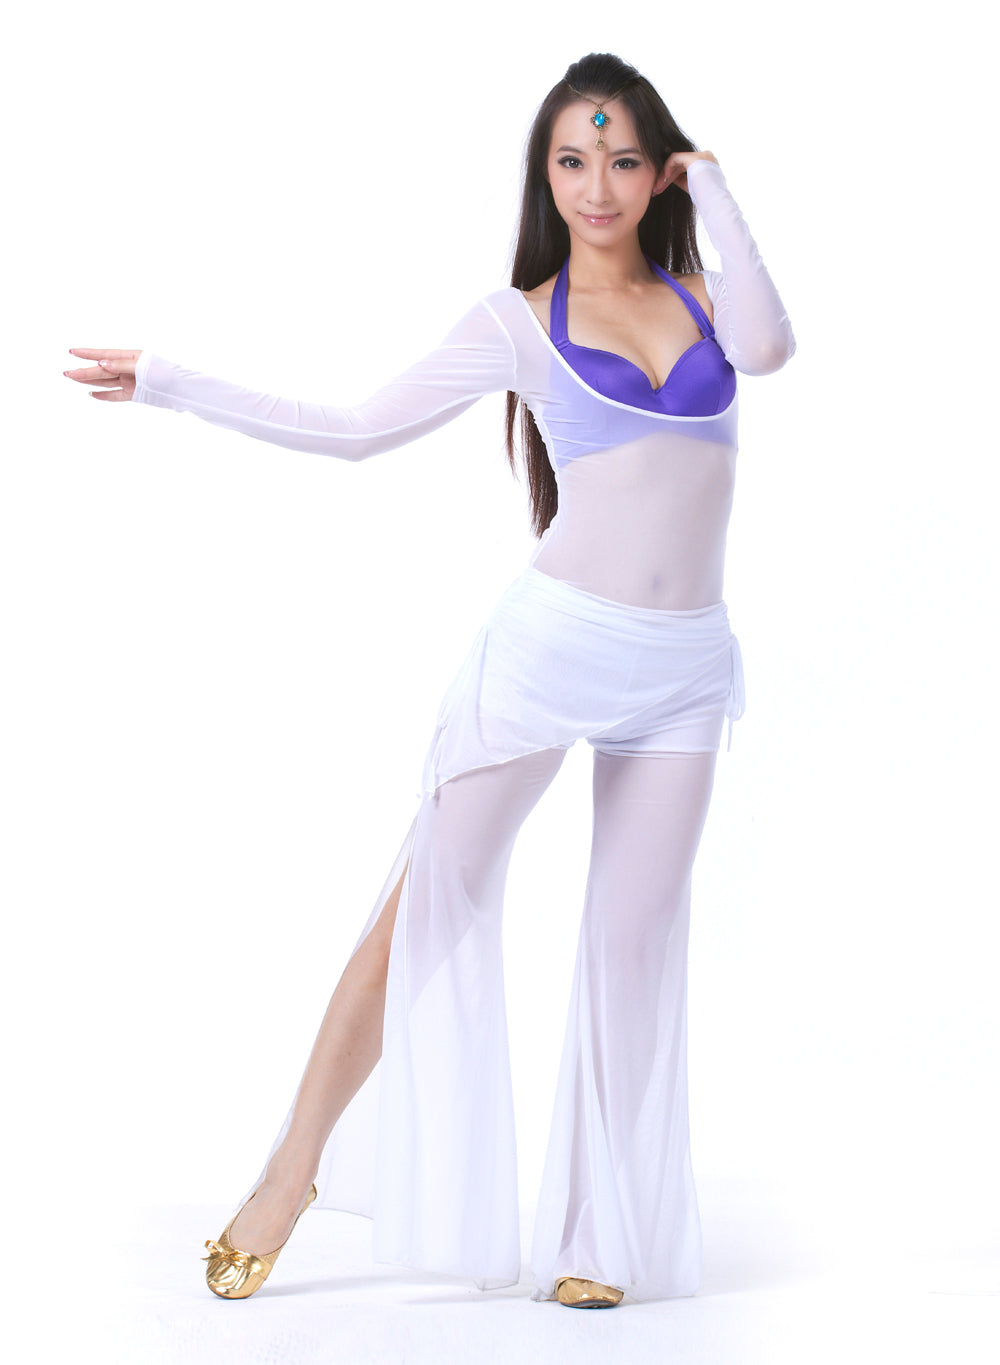 Long/Short Sleeve Bodycon Gauze Top  Sheer Pure Mesh T Shirts Sexy Adult Bellydance Costumes Carnival Outfit Open Bust Leotard